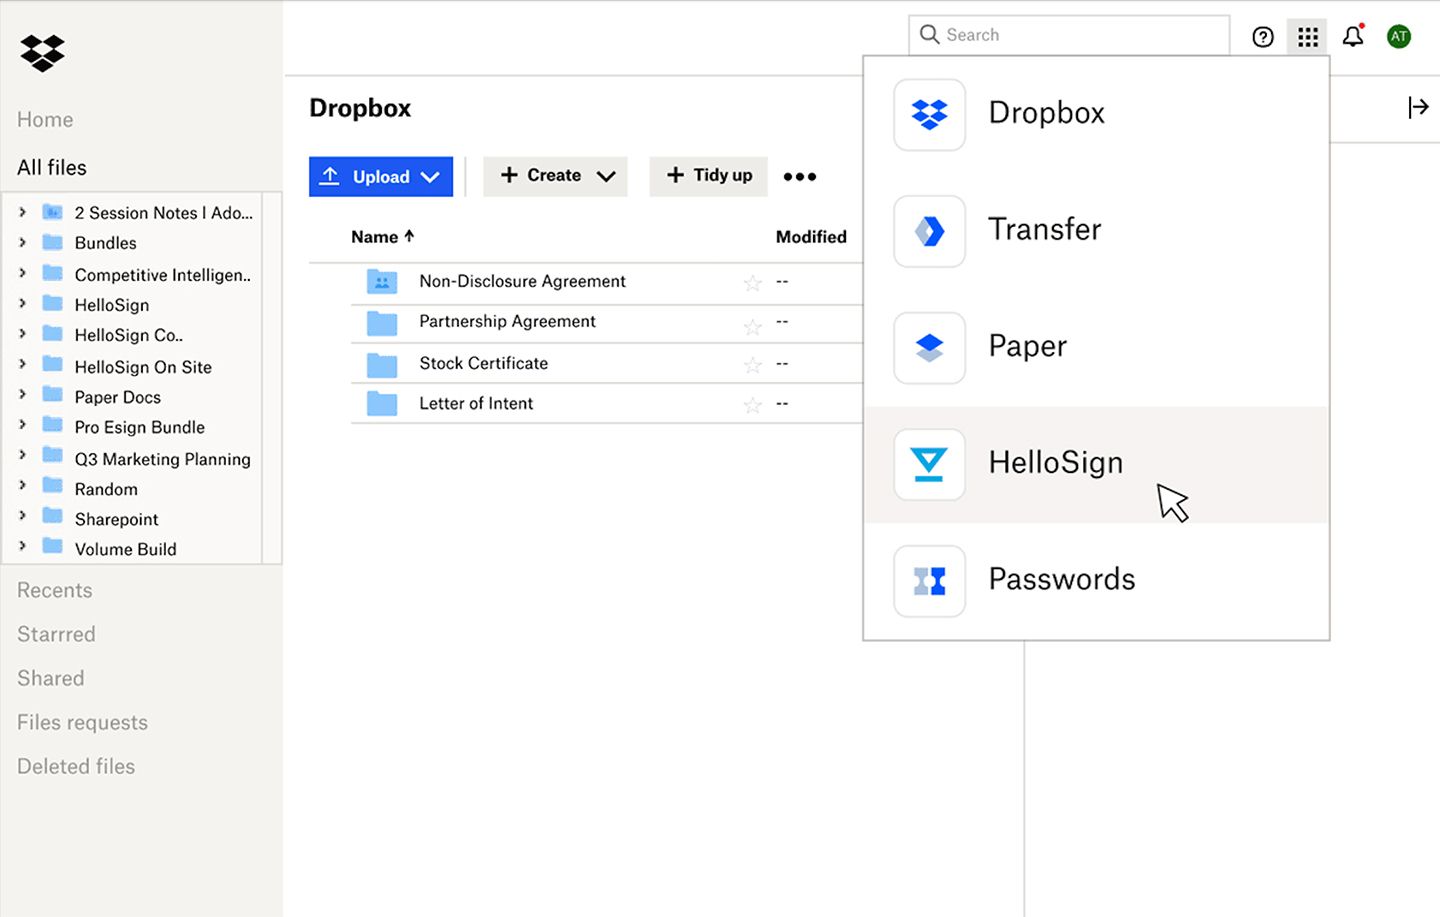 The Dropbox interface with a user selecting HelloSign from a product drop-down menu